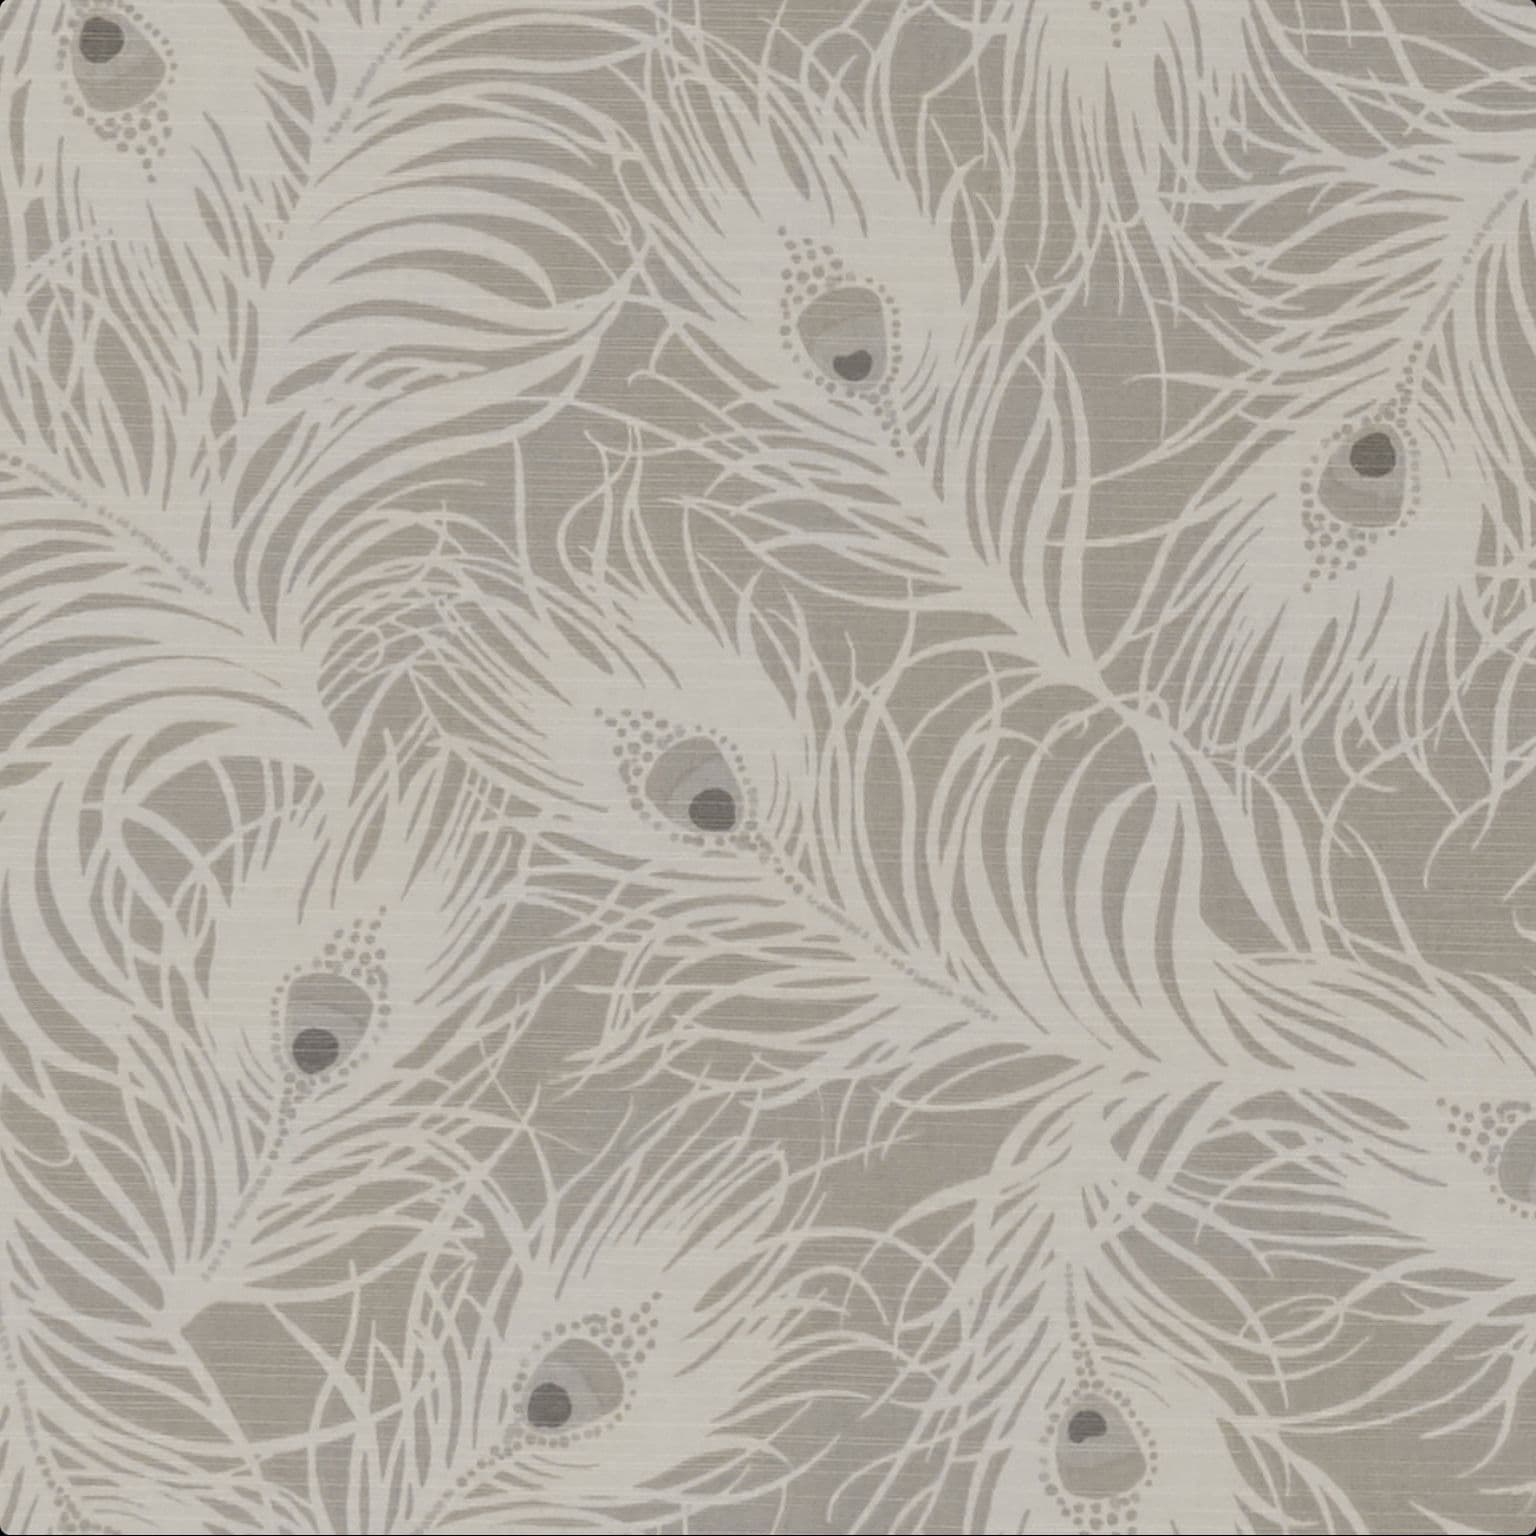 Harper Feathers Oilcloth in Natural